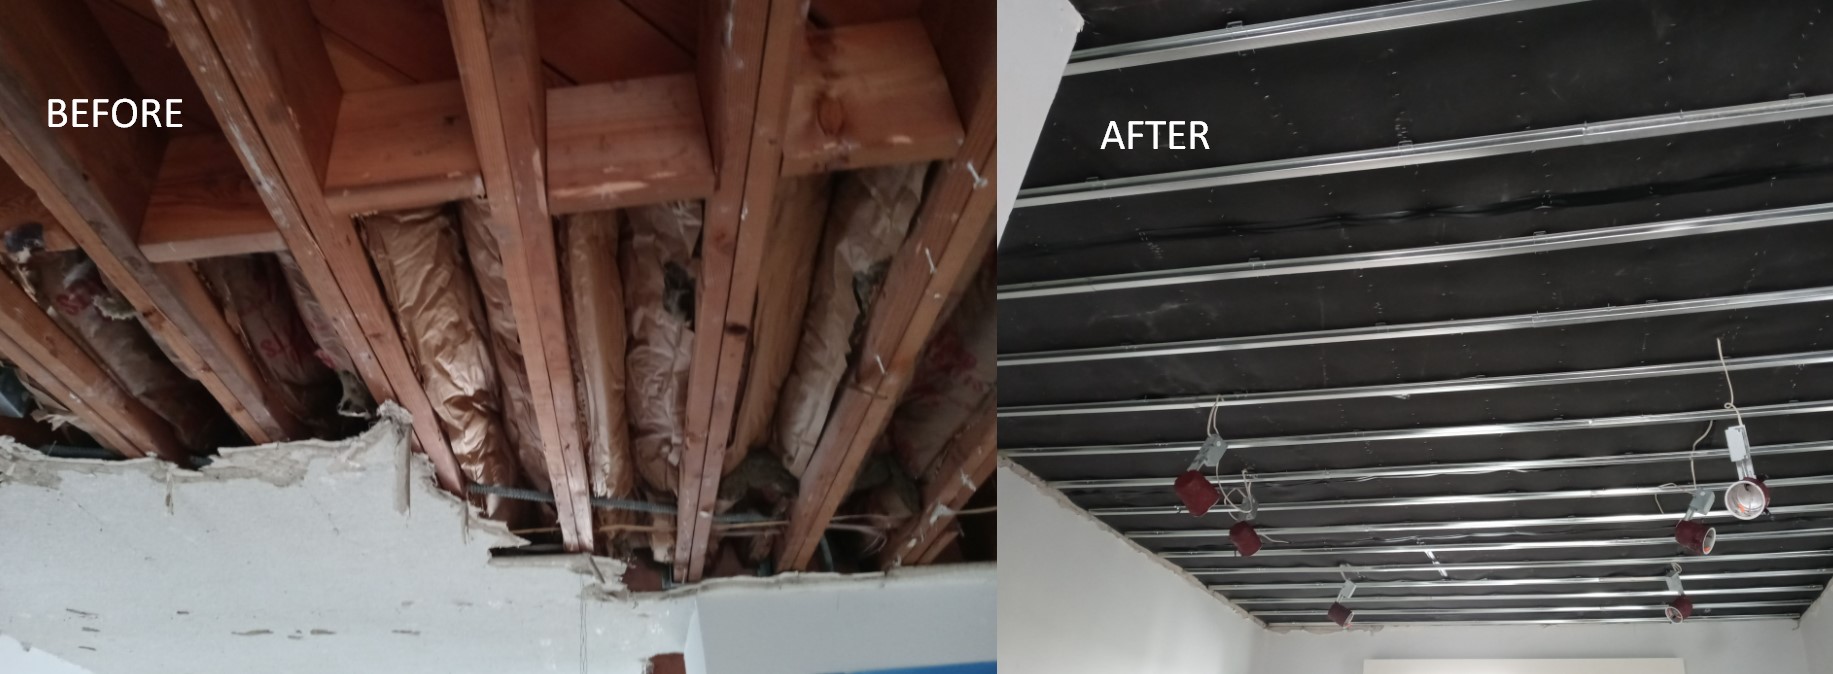 Effect after soundproofing services from PureEcoIncInc